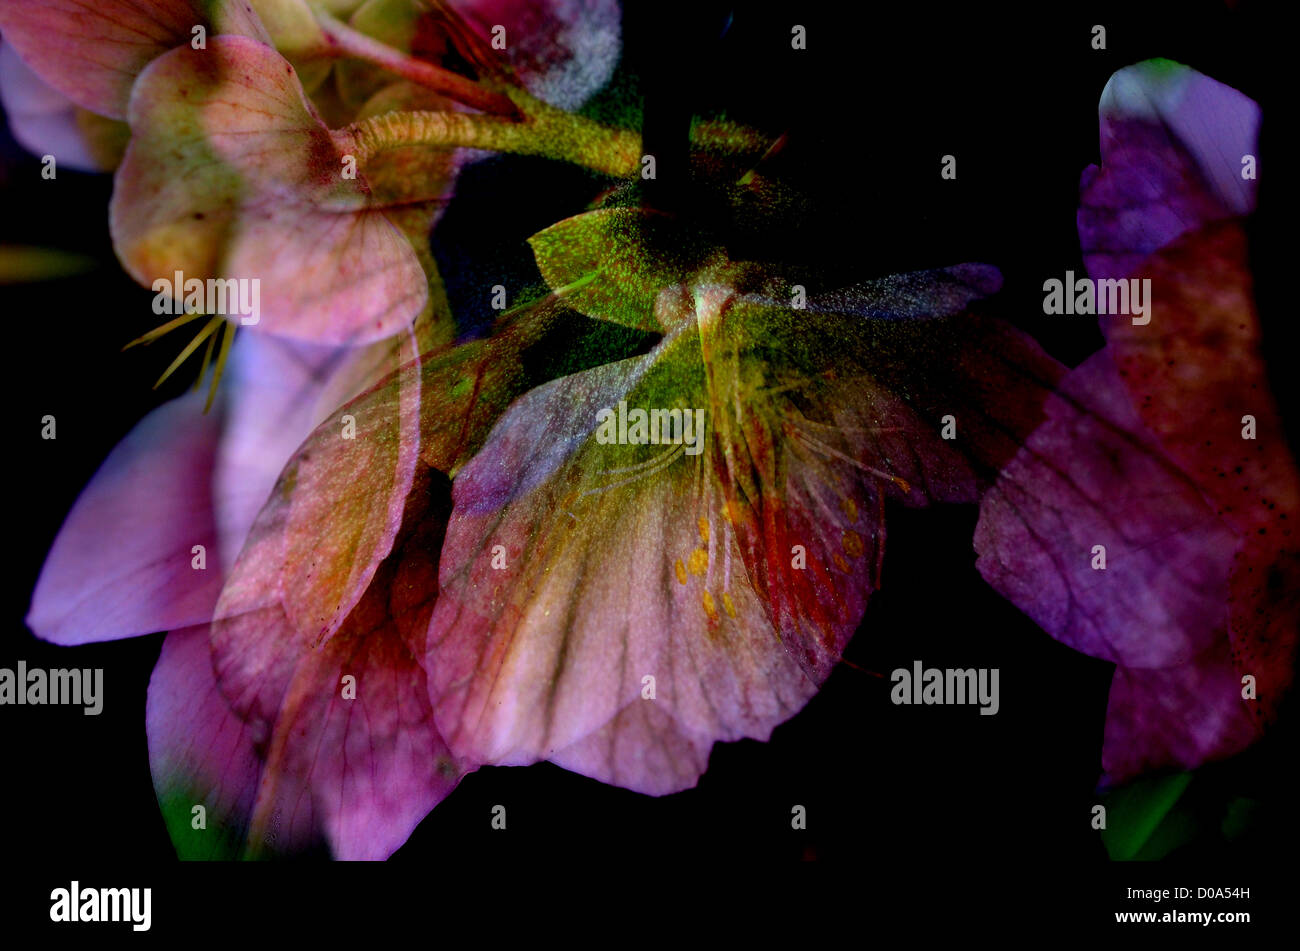 Pink Hellebore Flowers in a creative montage image Stock Photo